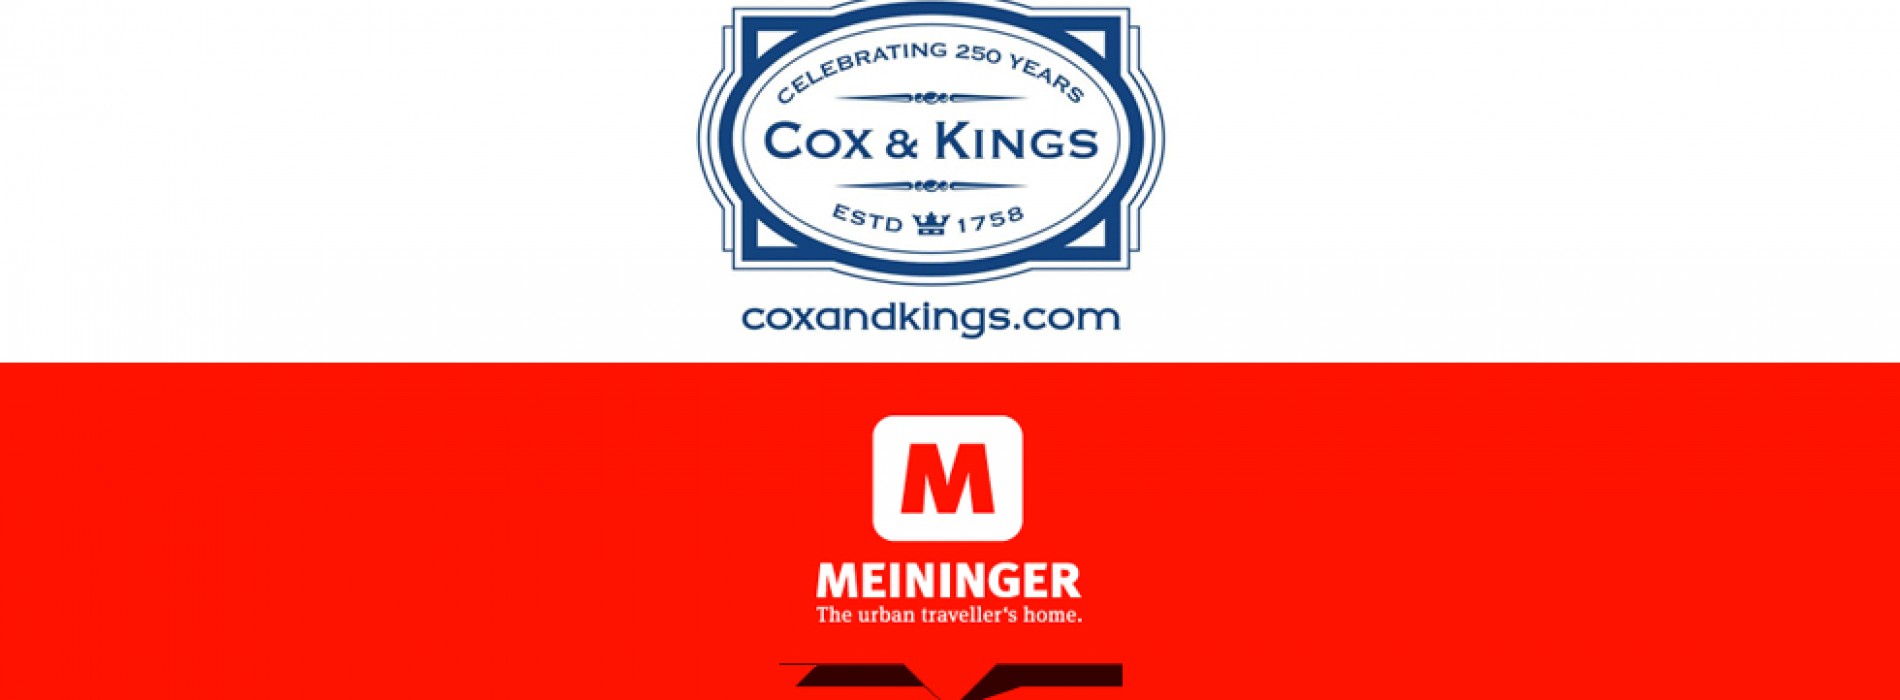 Cox and Kings owned MEININGER Hotels to open its second hotel in Brussels